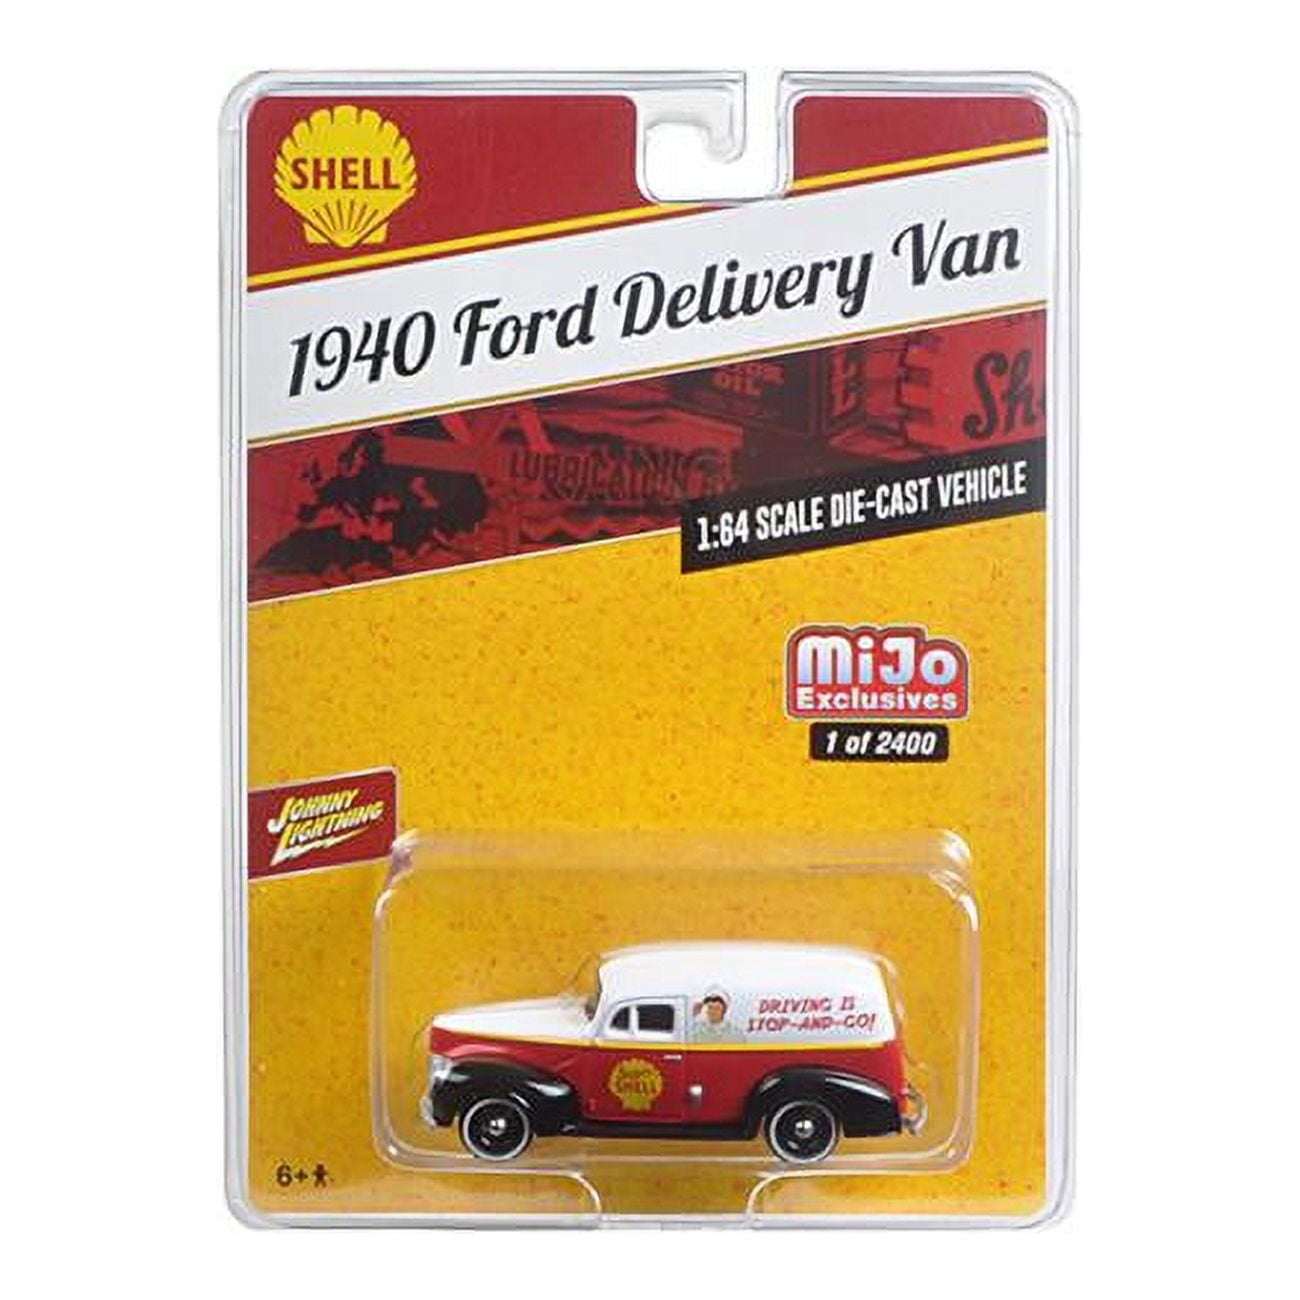 Jlcp7016 1940 Ford Delivery Van Shell 1 By 64 Diecast Model Car